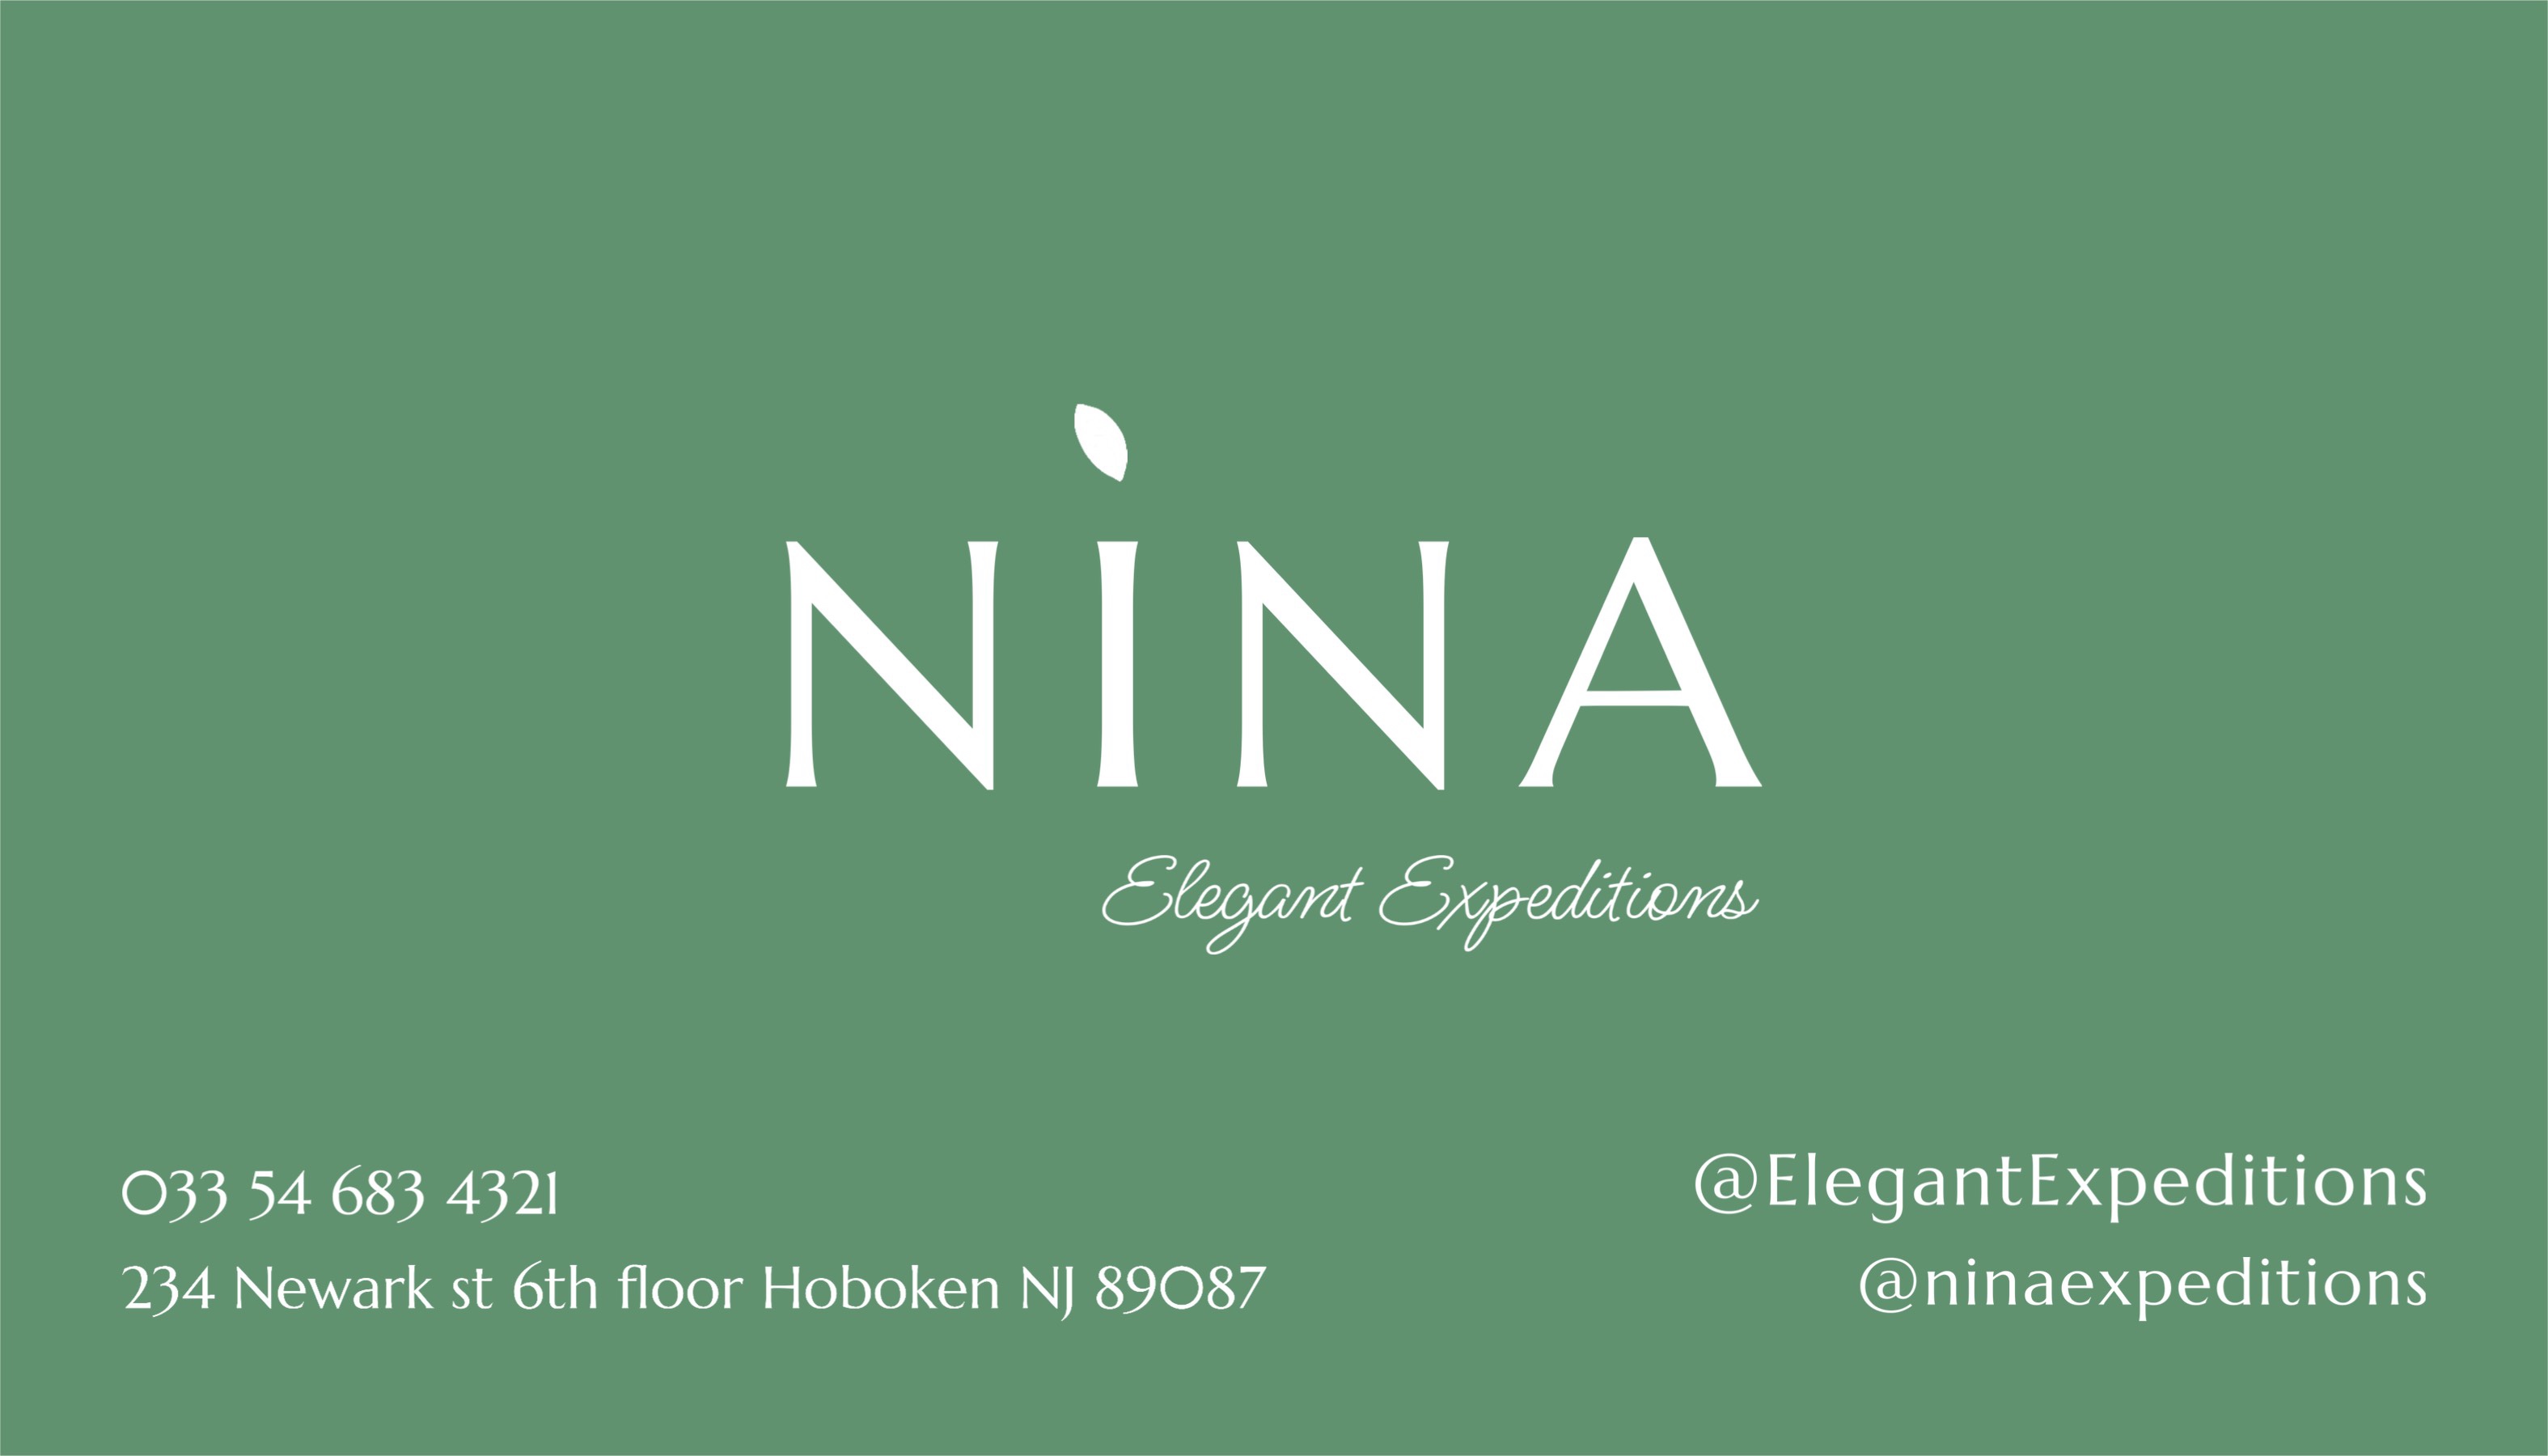 Nina expedition cute minimalistic logo green and white business card